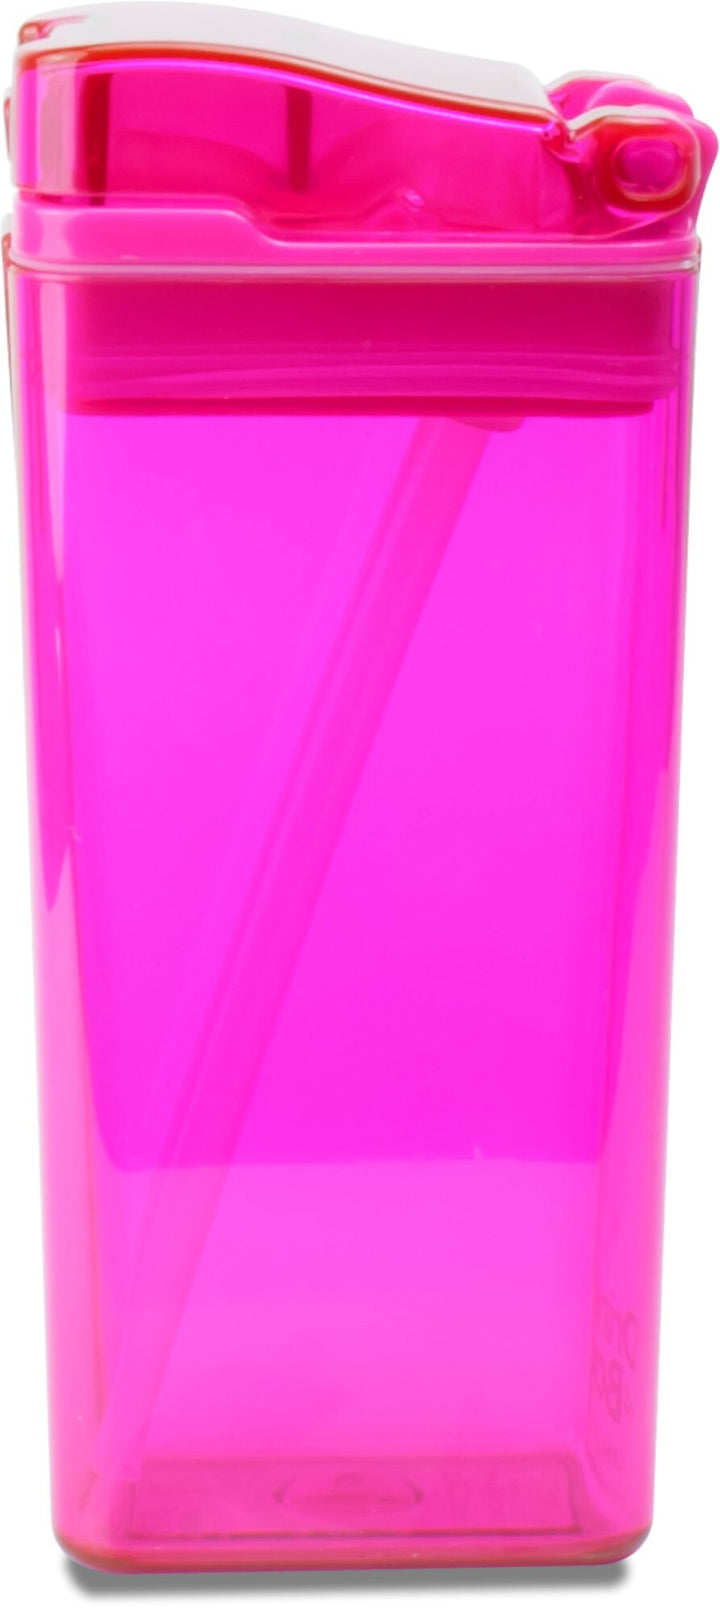 Drink in the Box - Pink - 12oz Drink in the Box - Pink - 12oz 55705245690